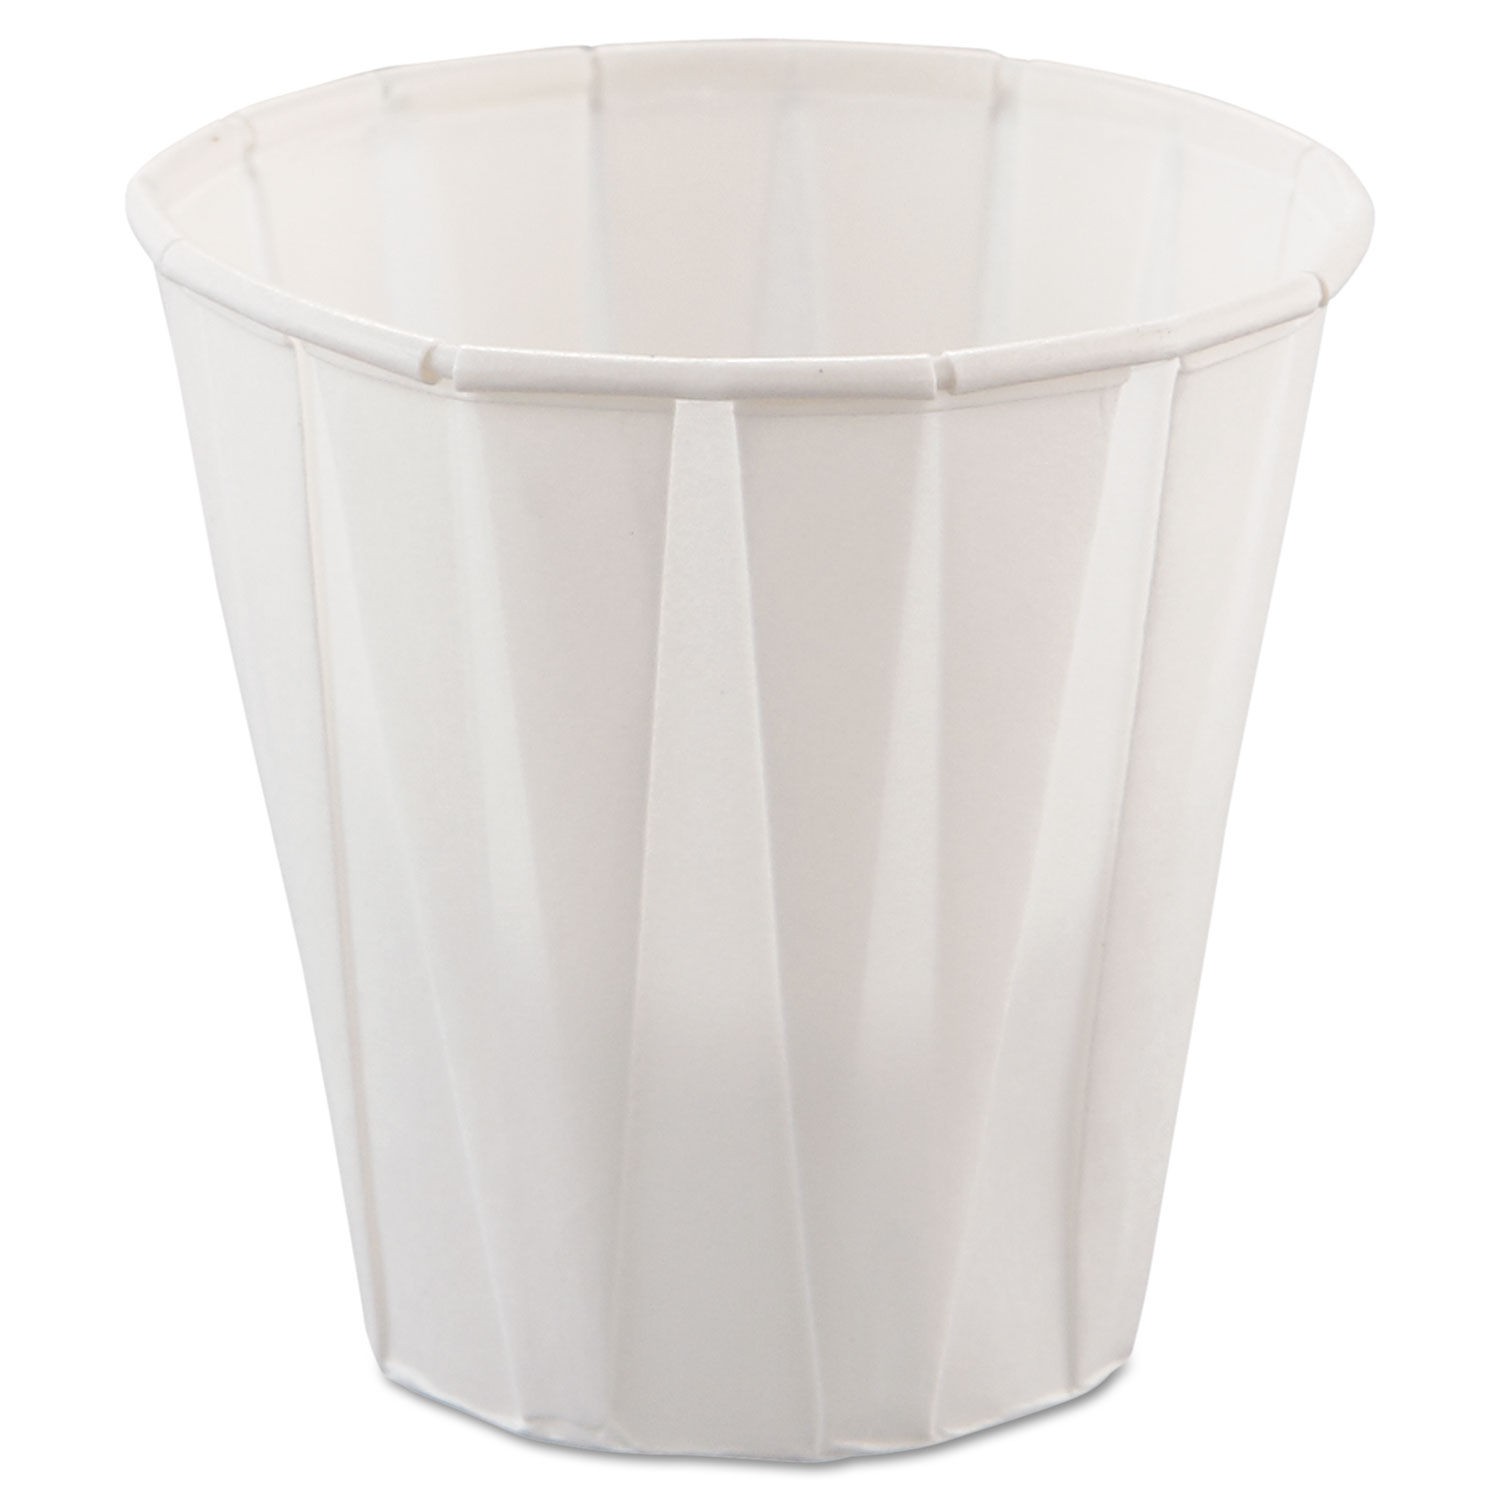 Paper Medical & Dental Treated Cups, 3.5 oz, White, 5000/Carton